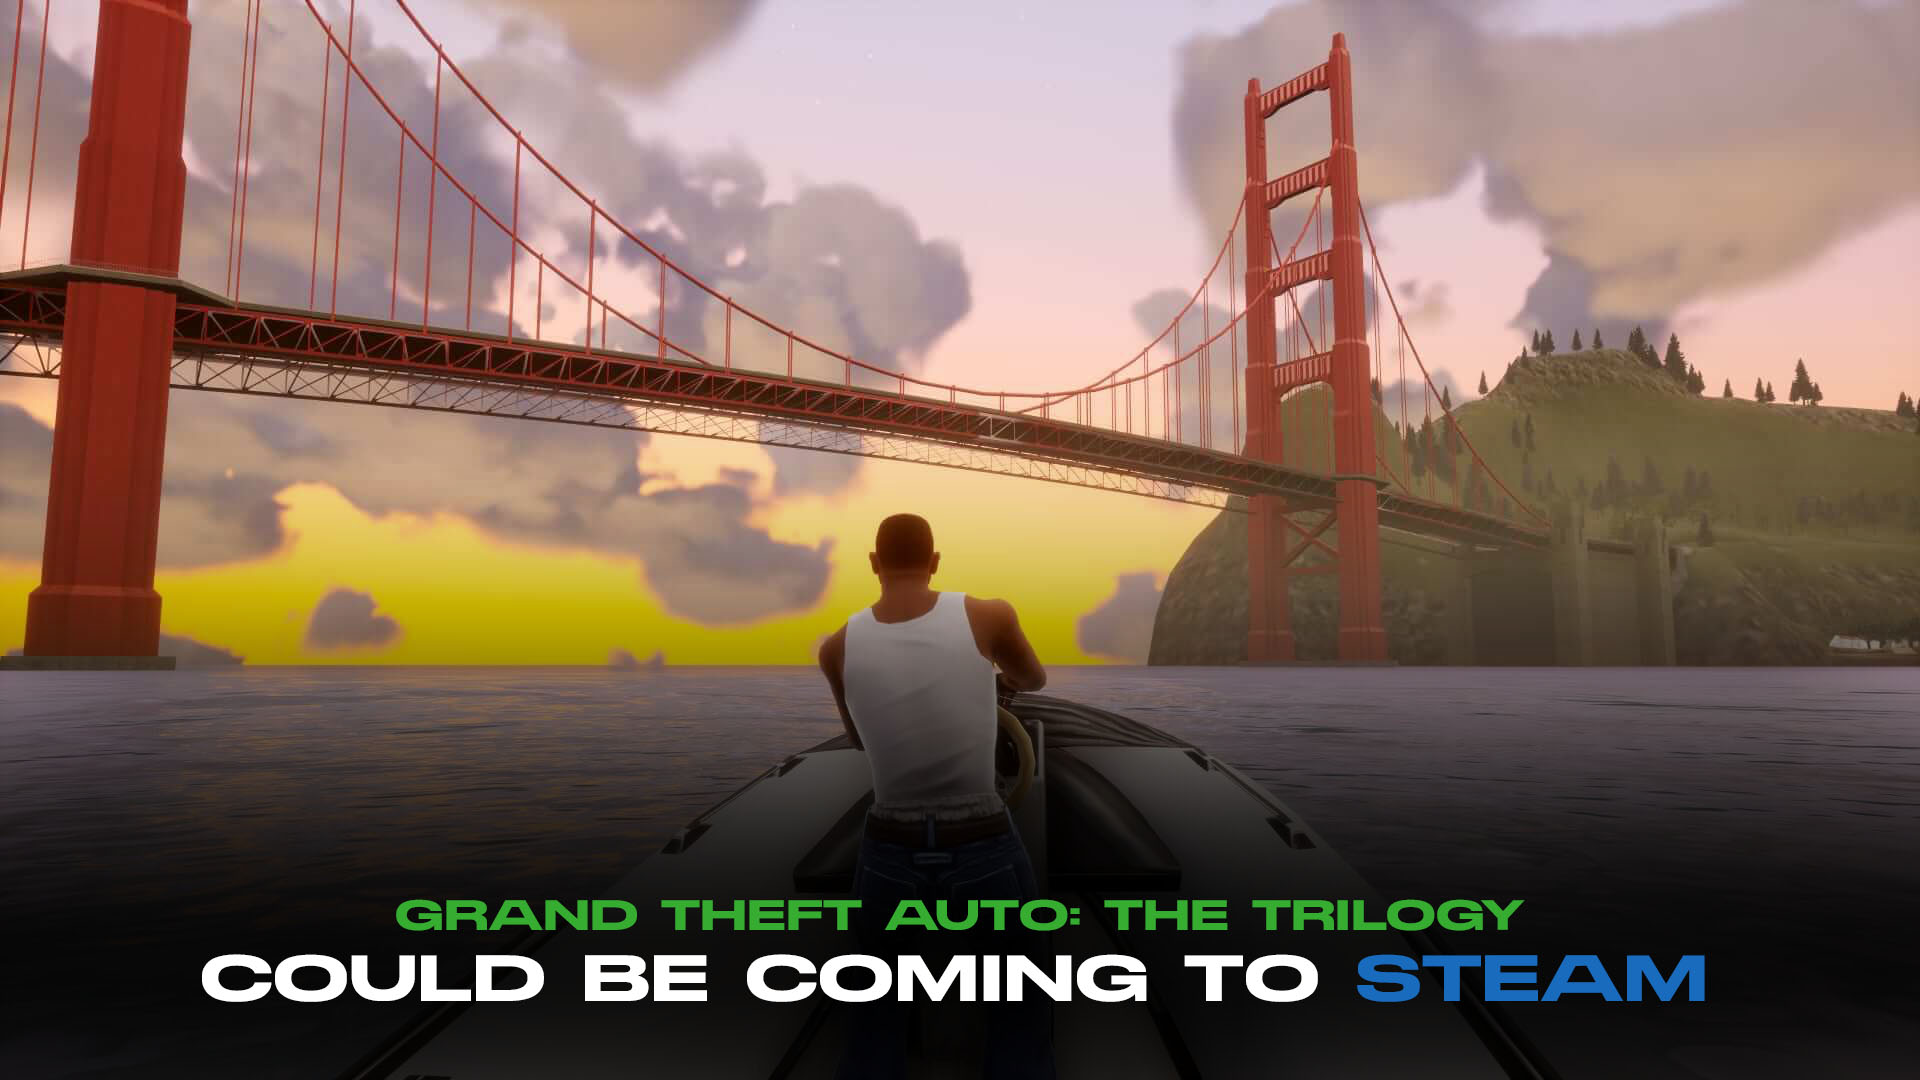 GTA Trilogy returns to Steam with Definitive Edition PC release